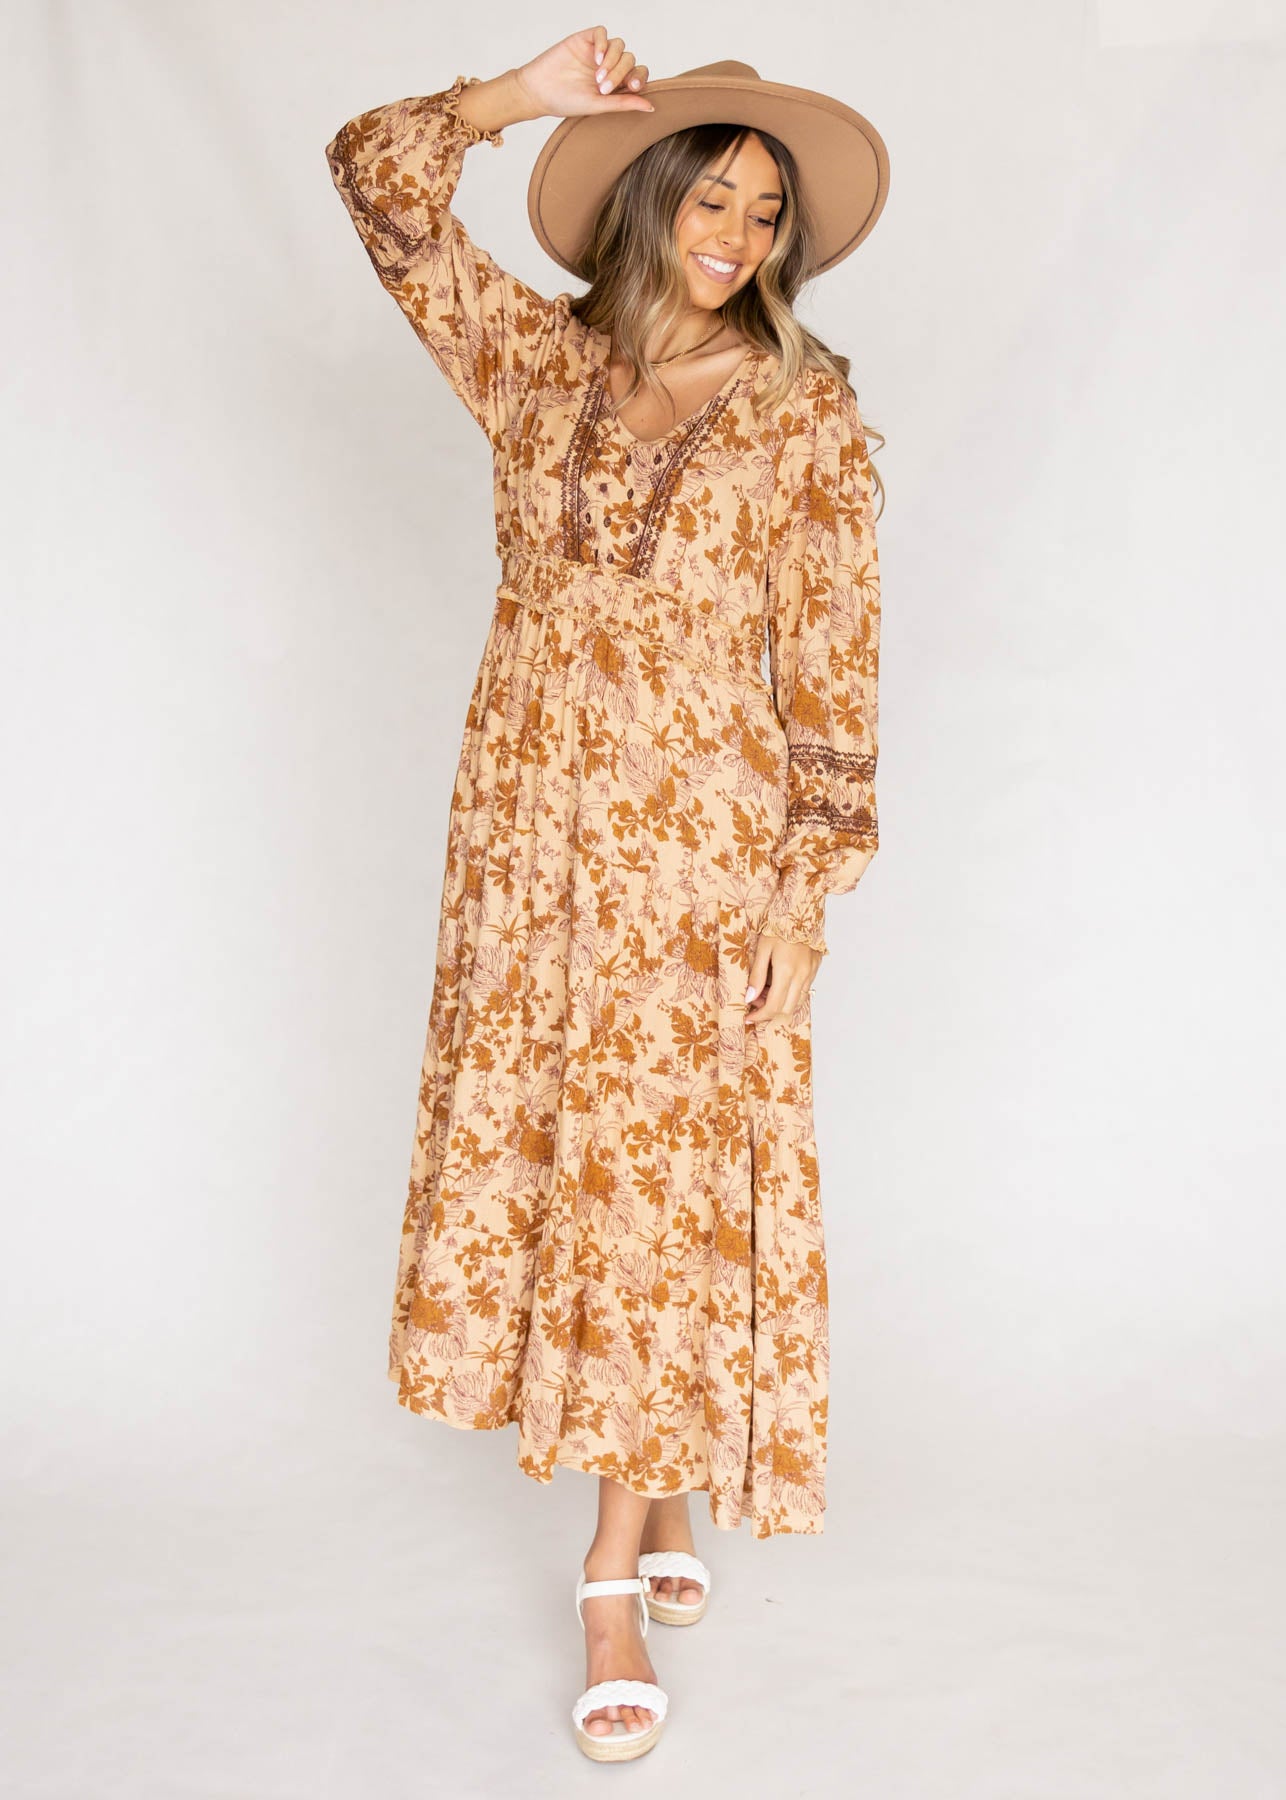 Floral camel dress with tie at the neck